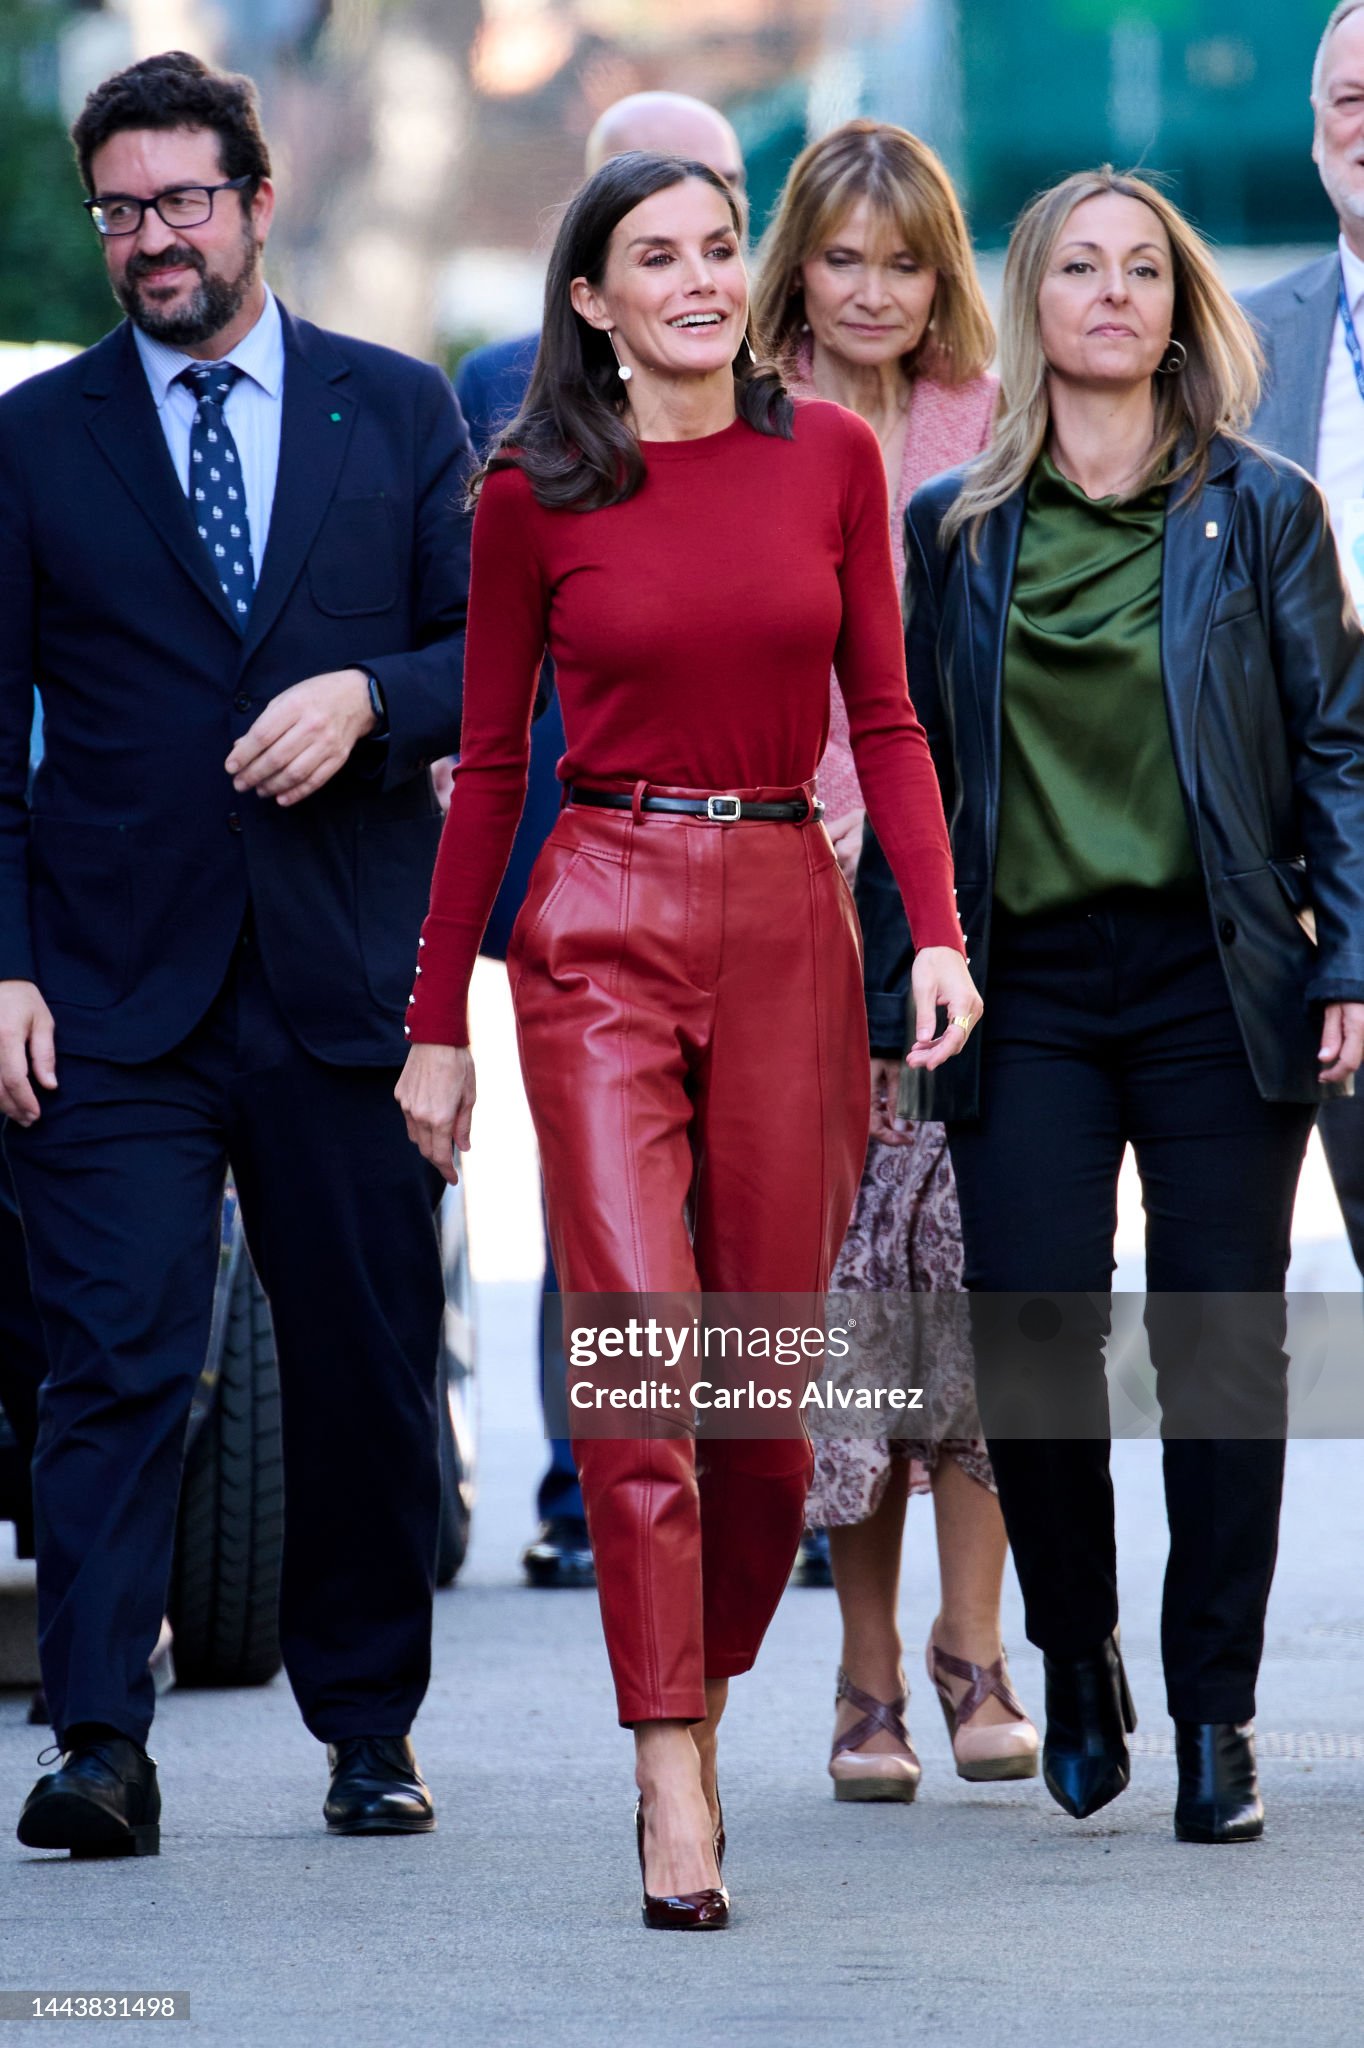 queen-letizia-of-spain-attends-events-related-to-mental-health-and-intellectual-disabilities.jpg?s=2048x2048&w=gi&k=20&c=ZM9I1Monr_Btr_DdWyHbr9A7mN-vRPnPOW2VyCkXrqw=